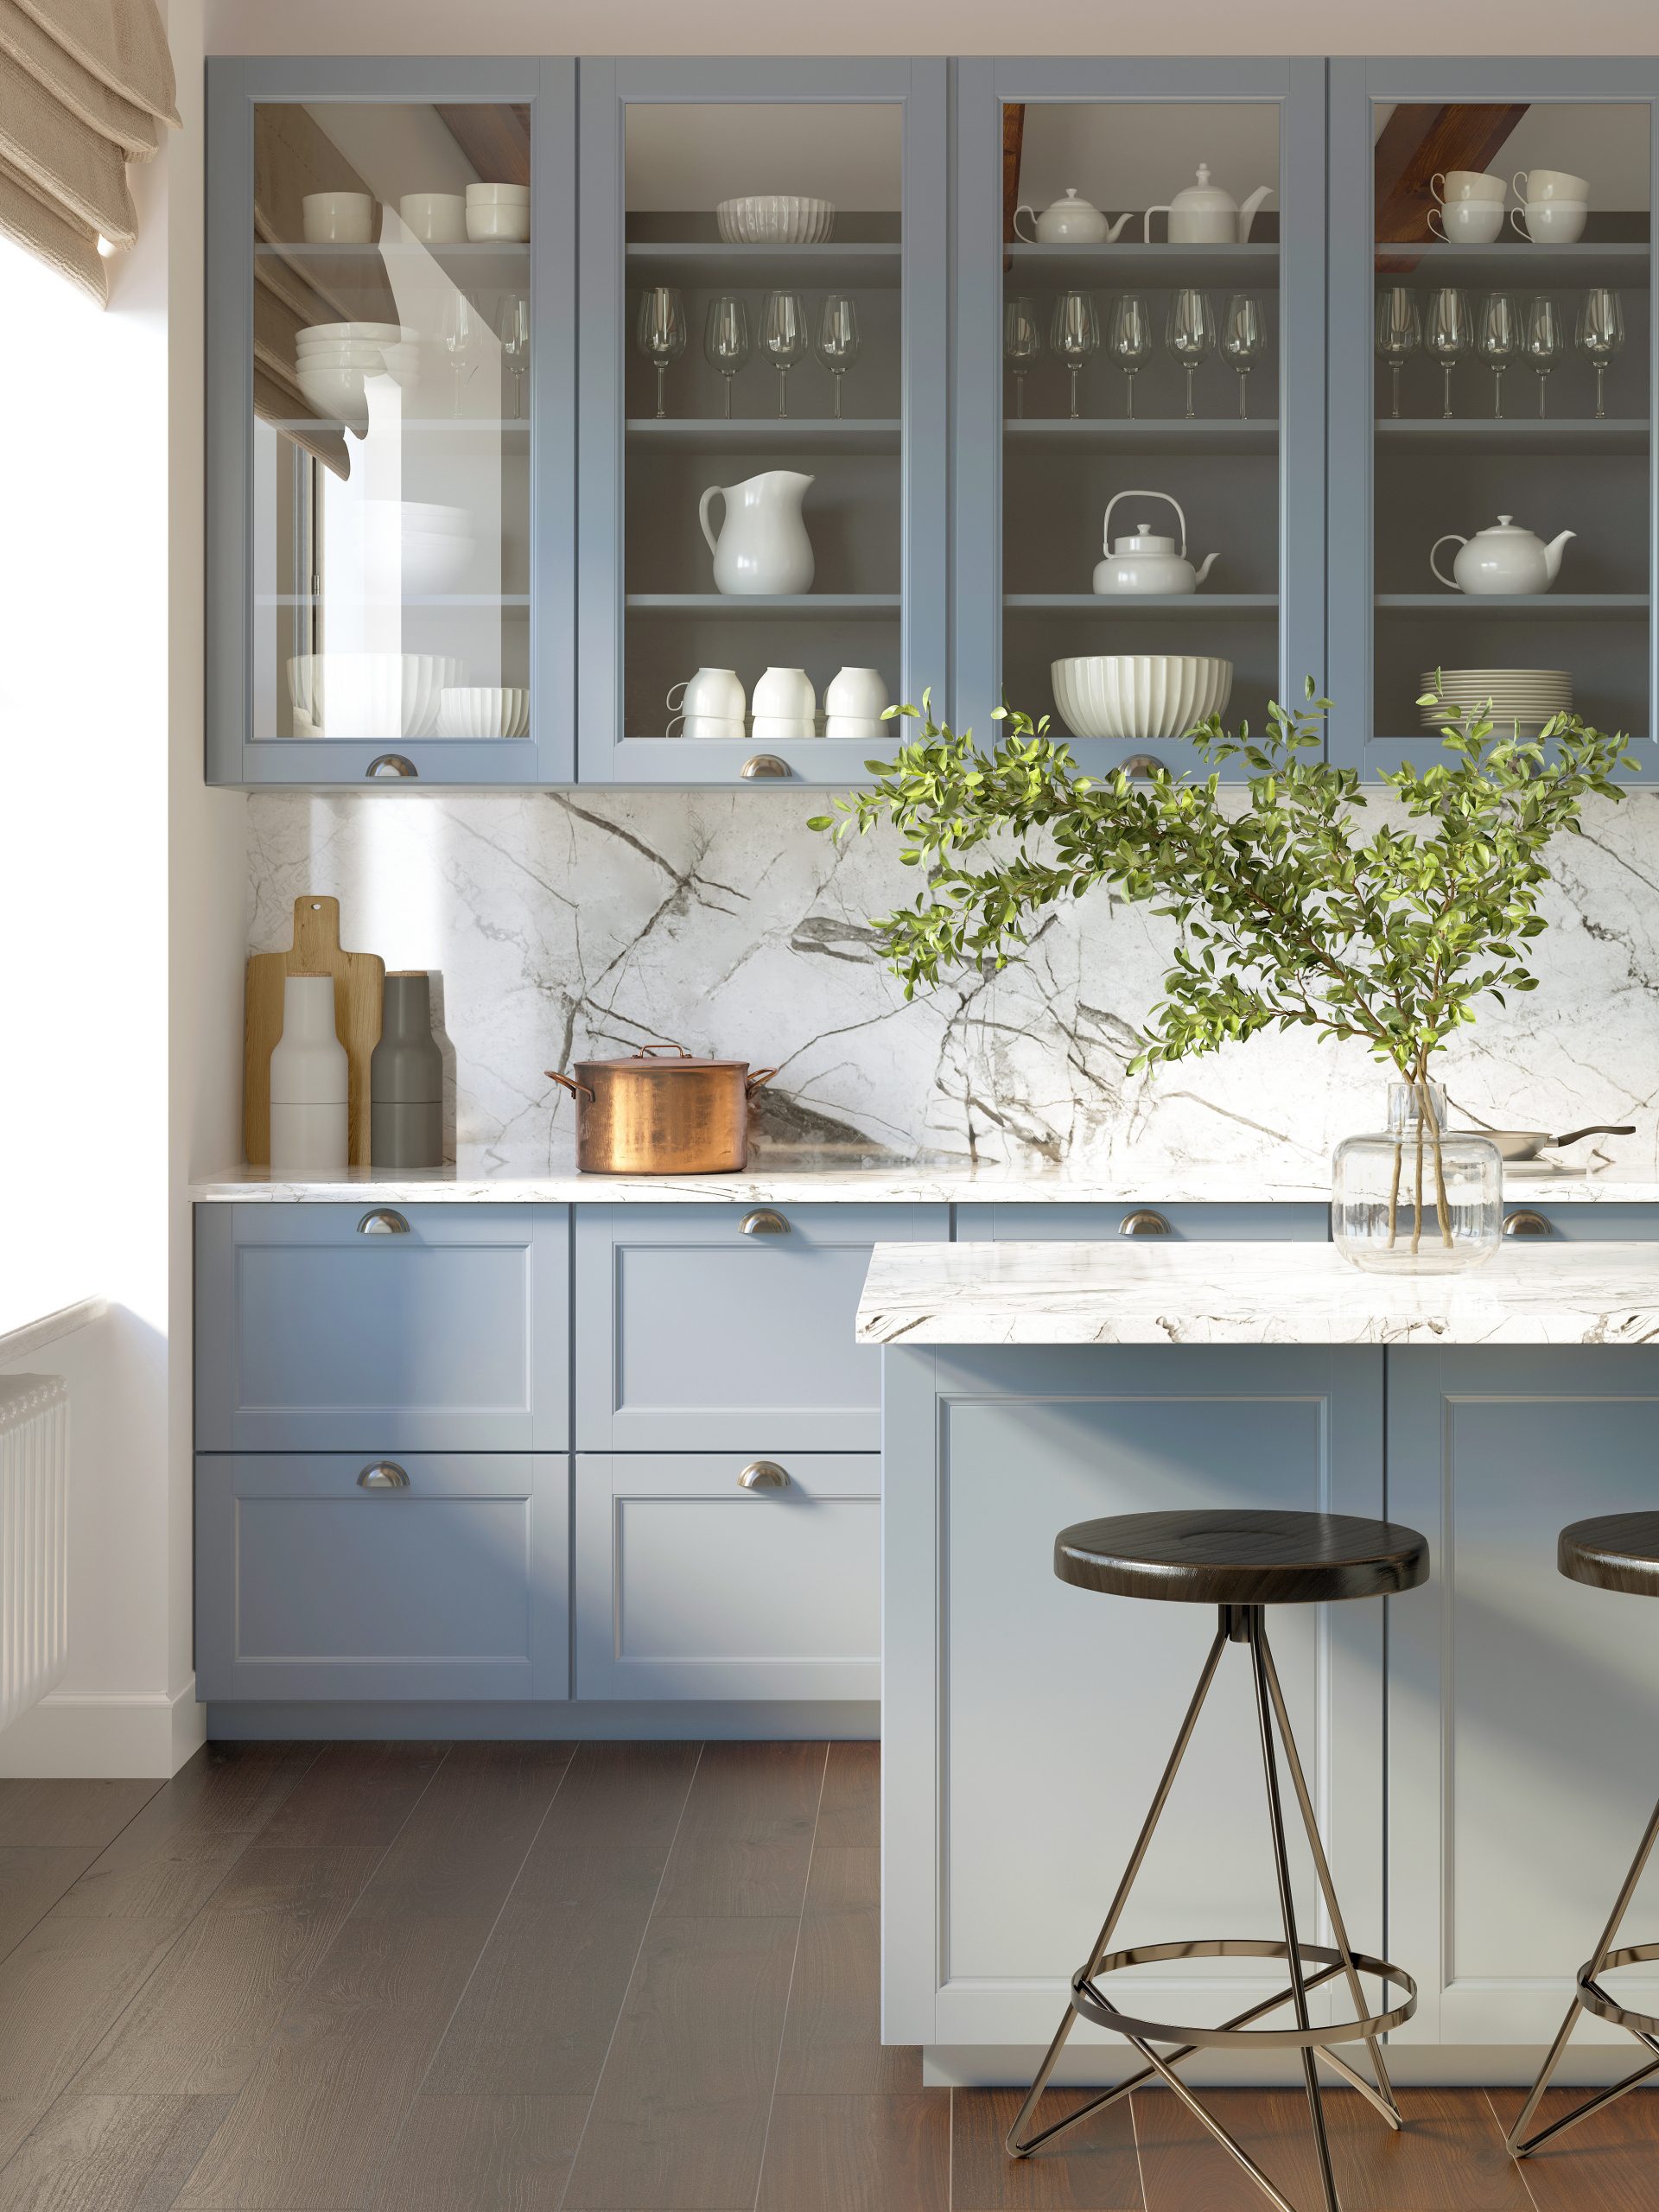 What Are Some Options for Less Expensive Cabinets? - Calcagni Real Estate